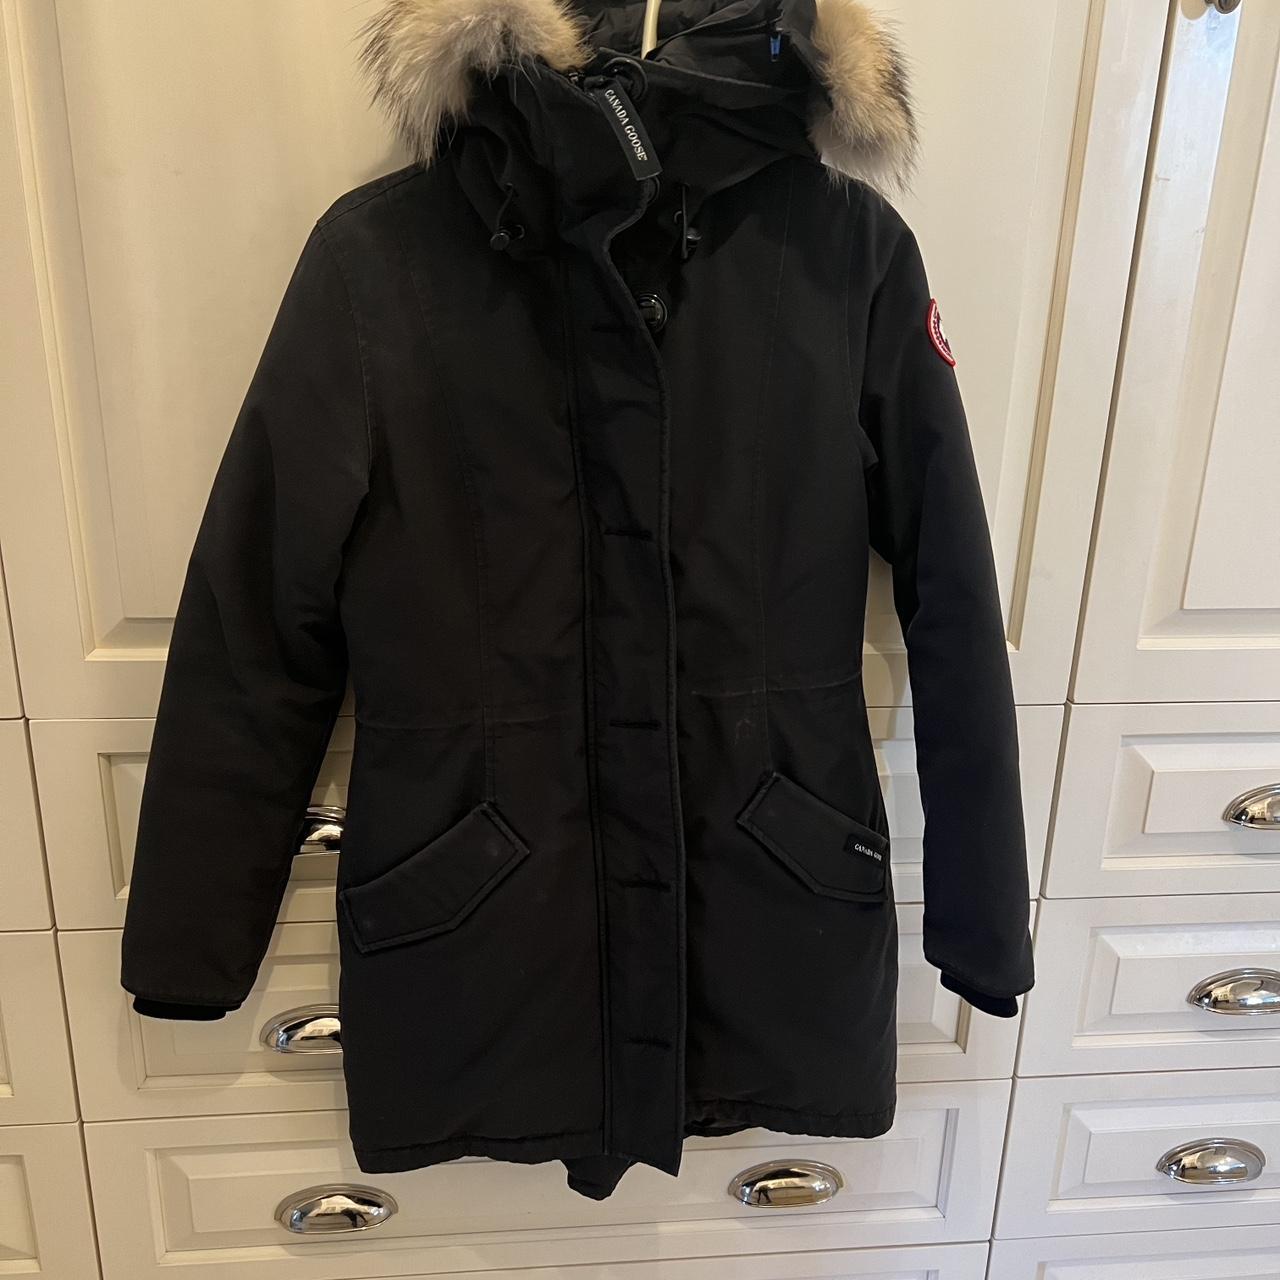 Canada Goose, dry cleaned, only wore three seasons - Depop